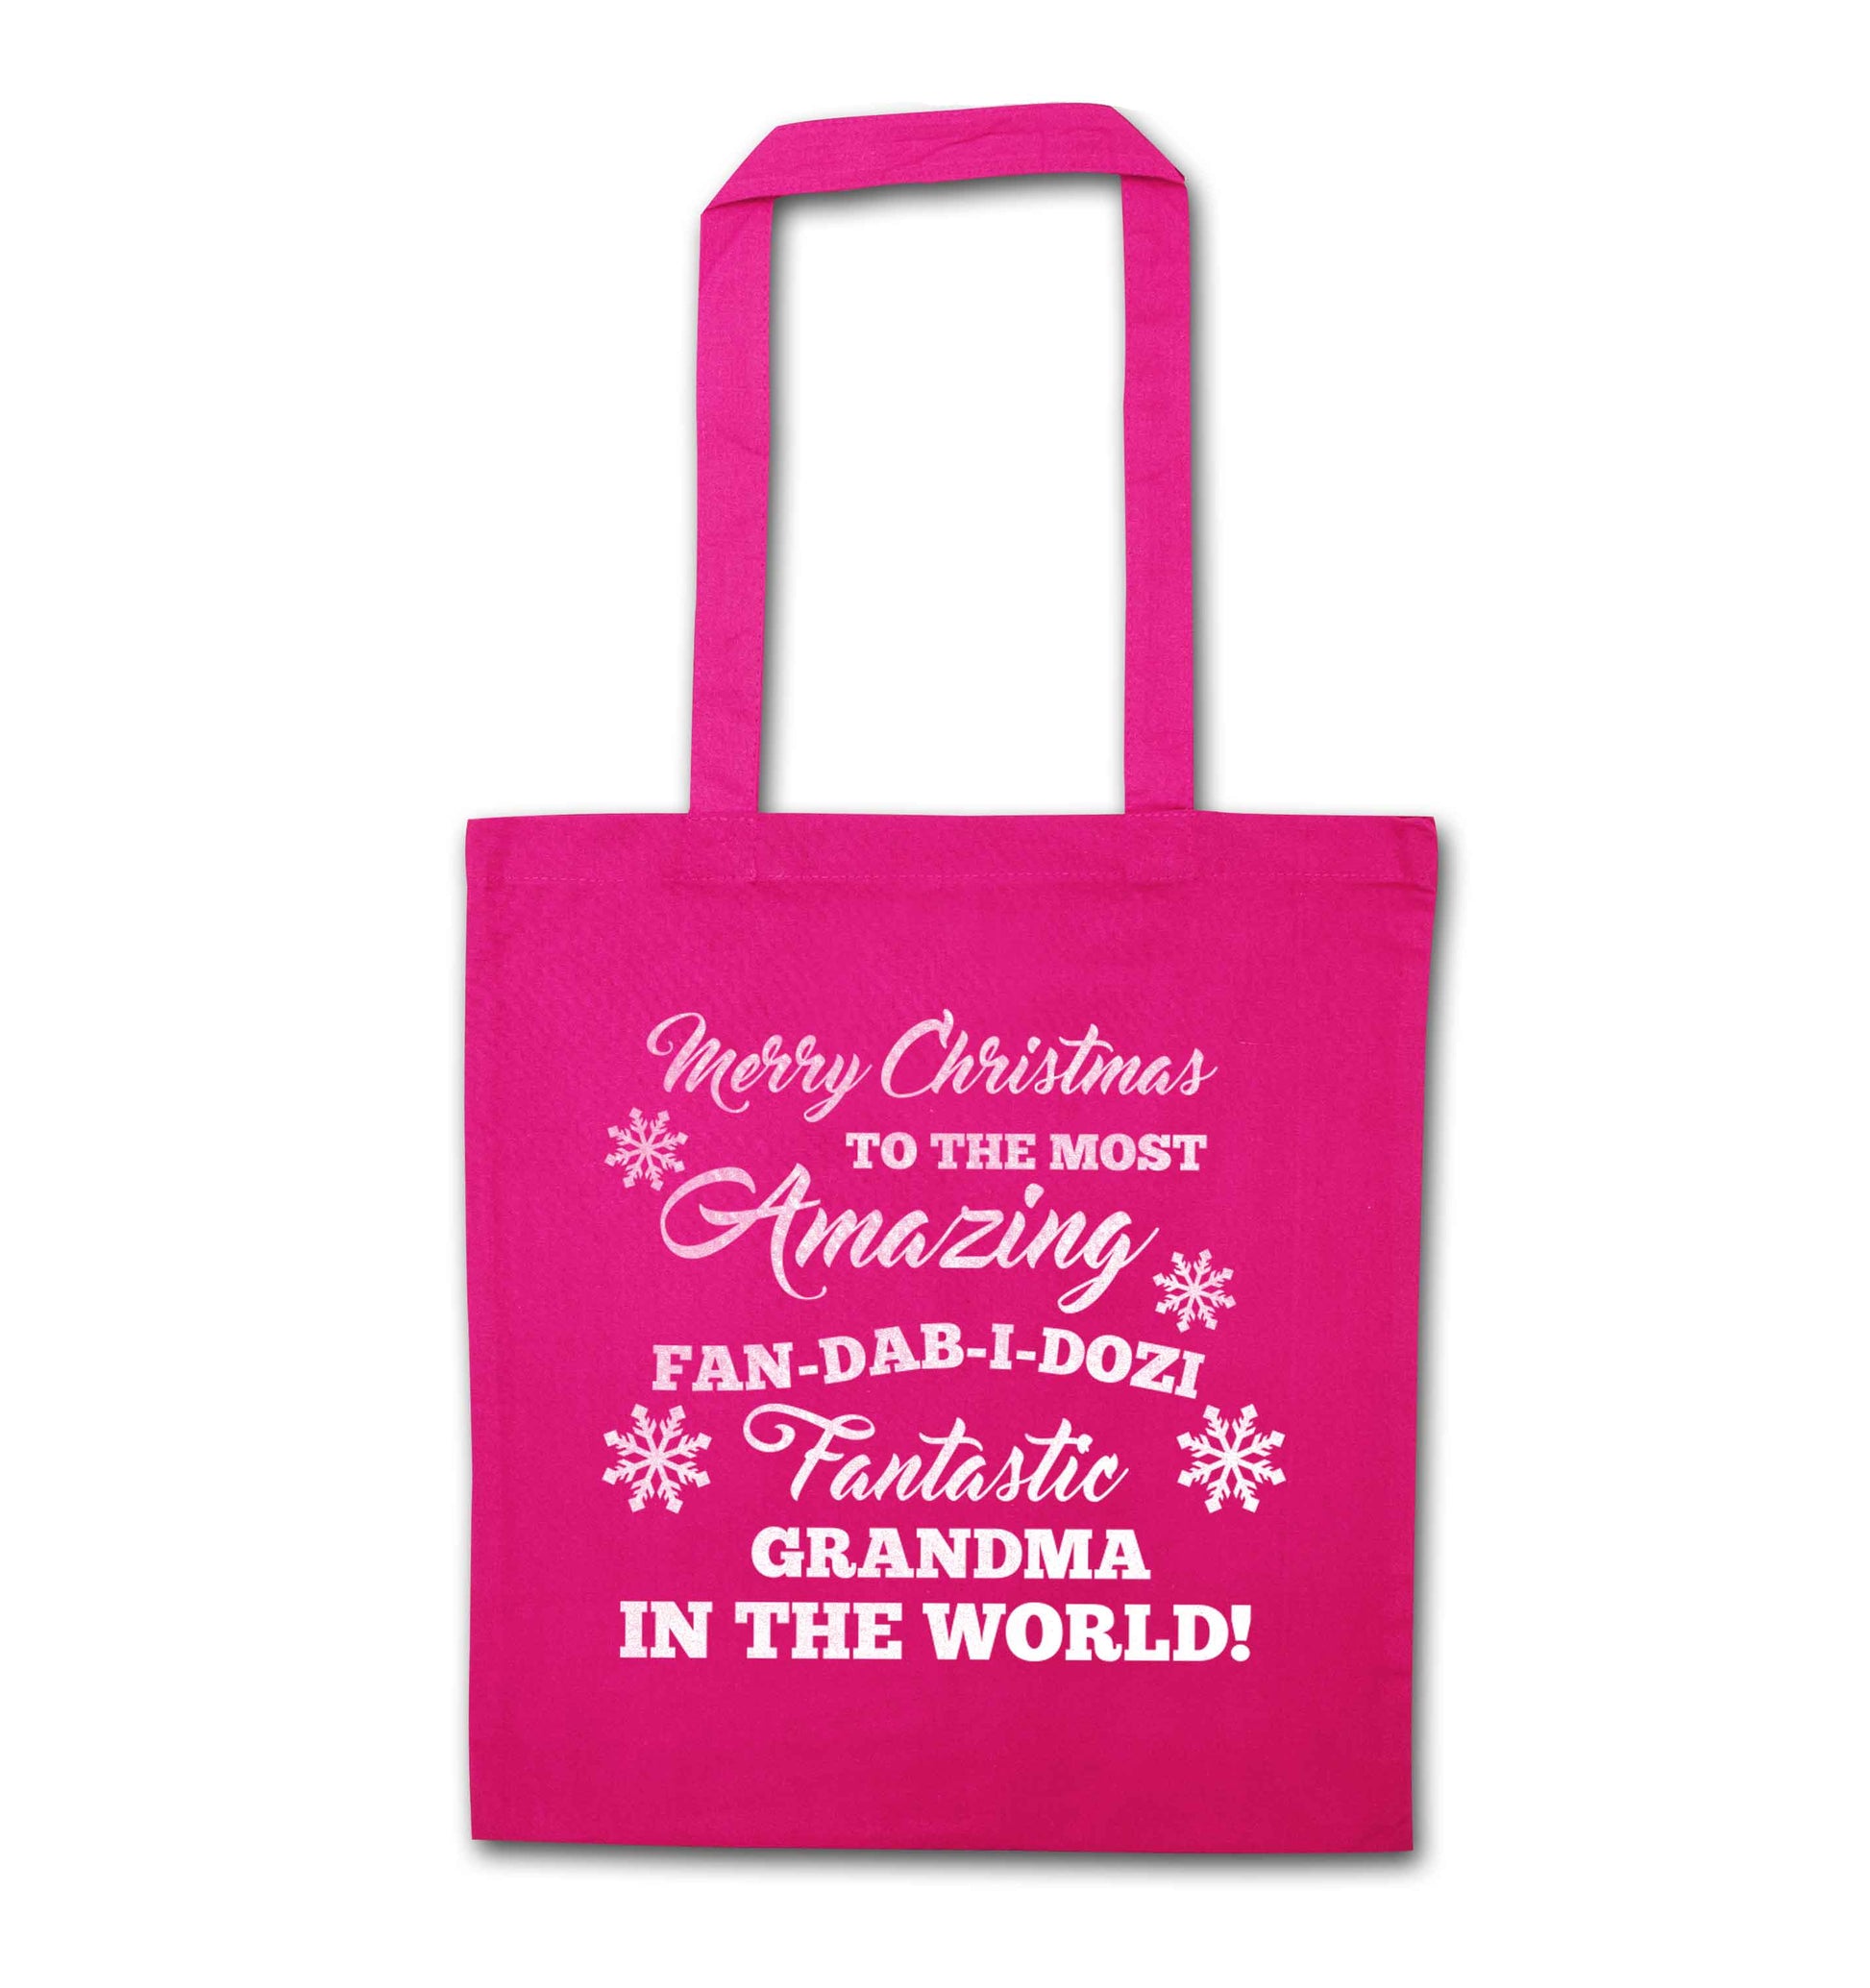 Merry Christmas to the most amazing fan-dab-i-dozi fantasic Grandma in the world pink tote bag